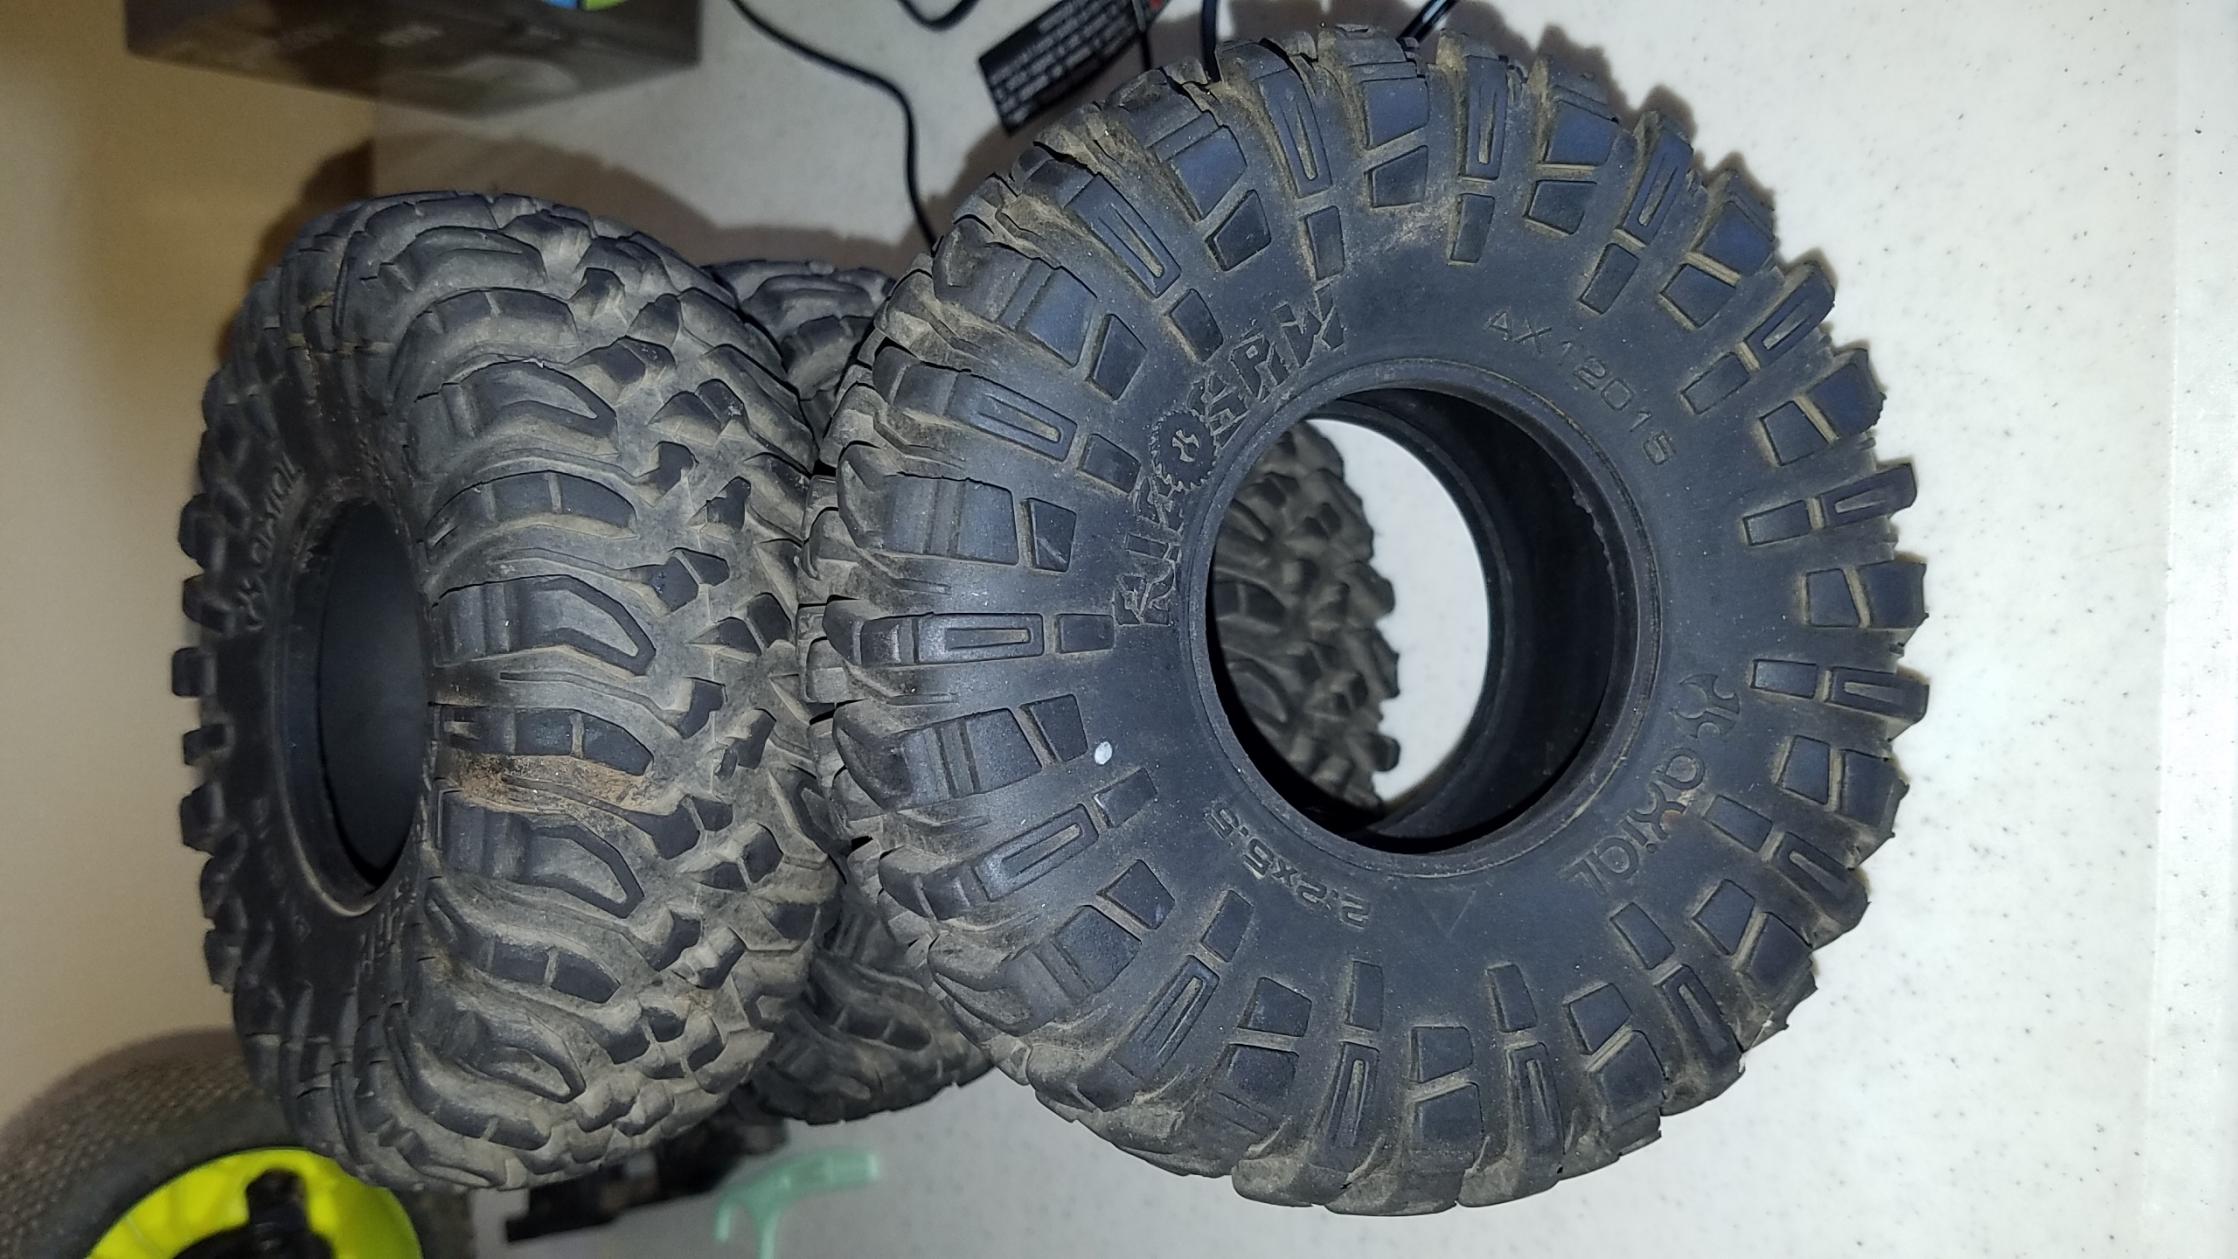 Axial ripssw tires 2.2 Near new cheap! - R/C Tech Forums